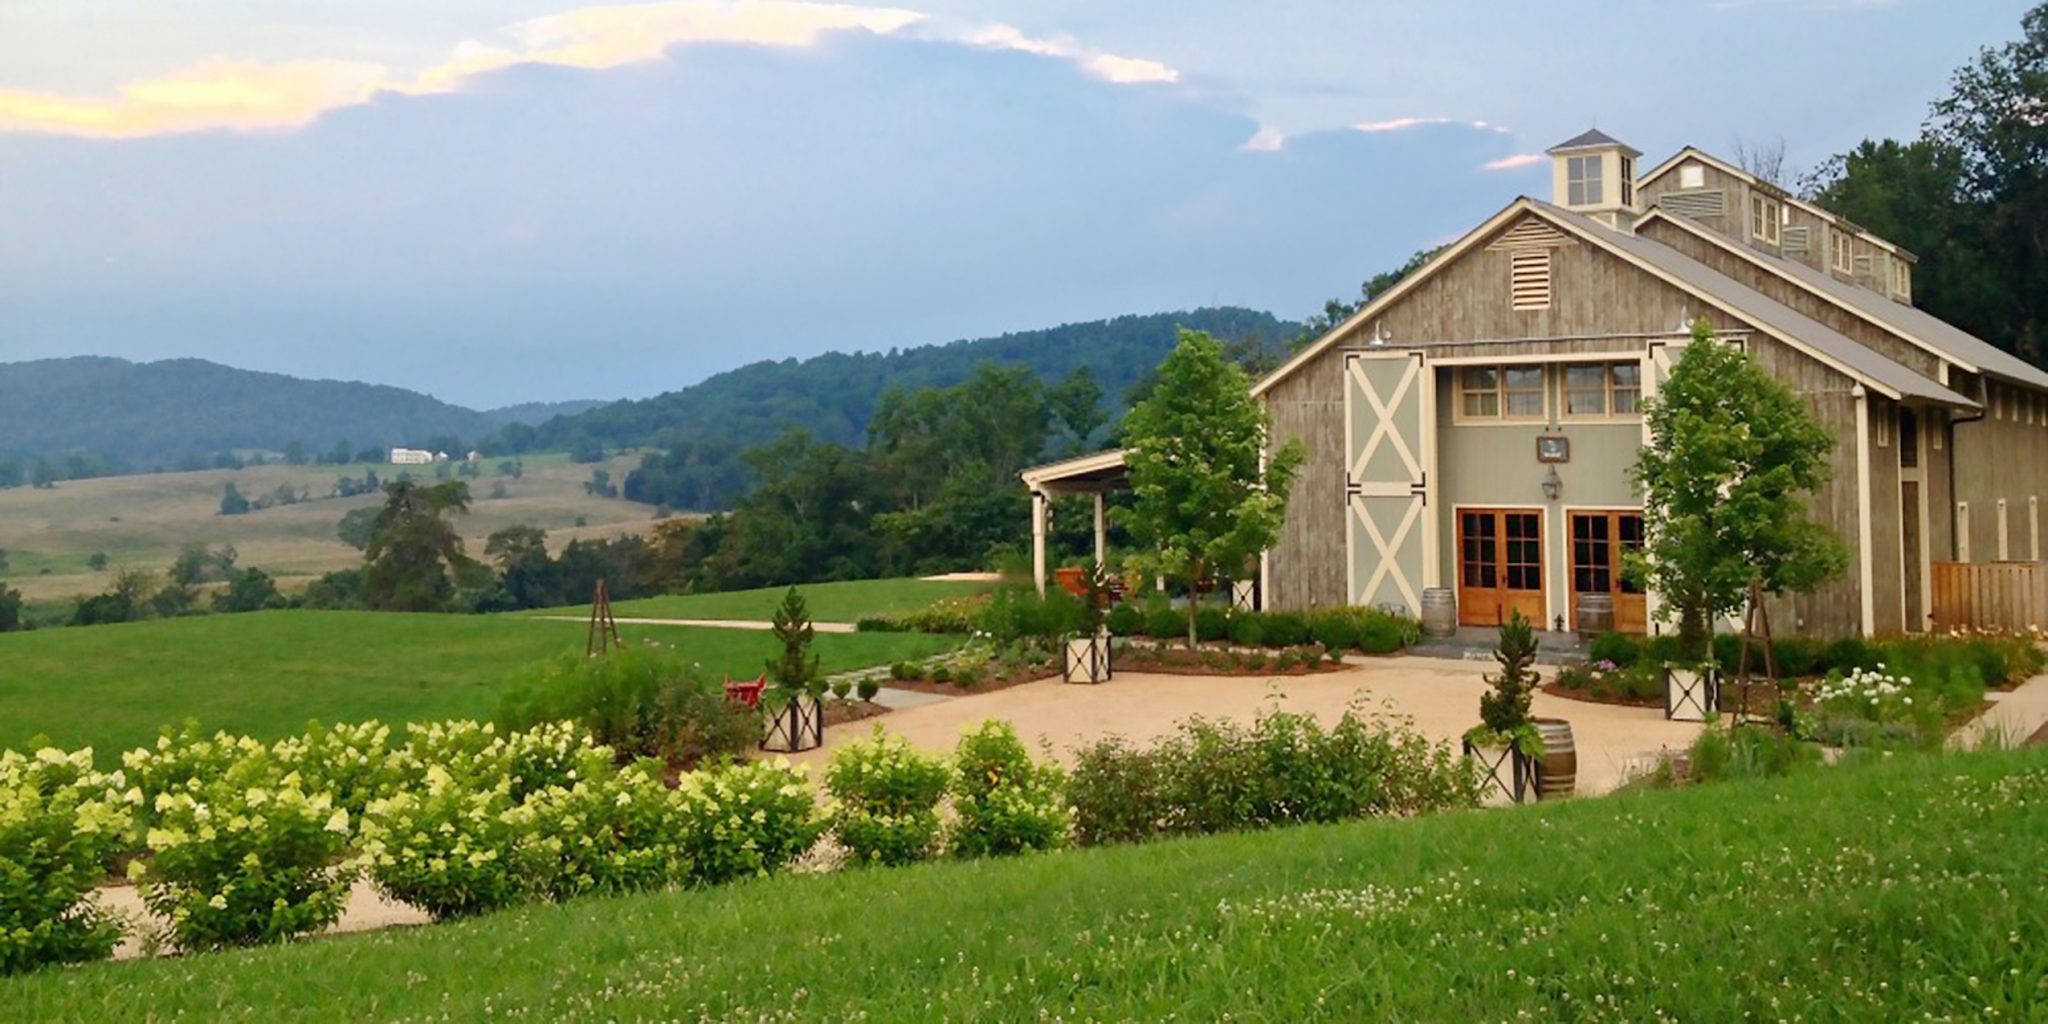 Pippin Hill Farm & Winery Cover Image